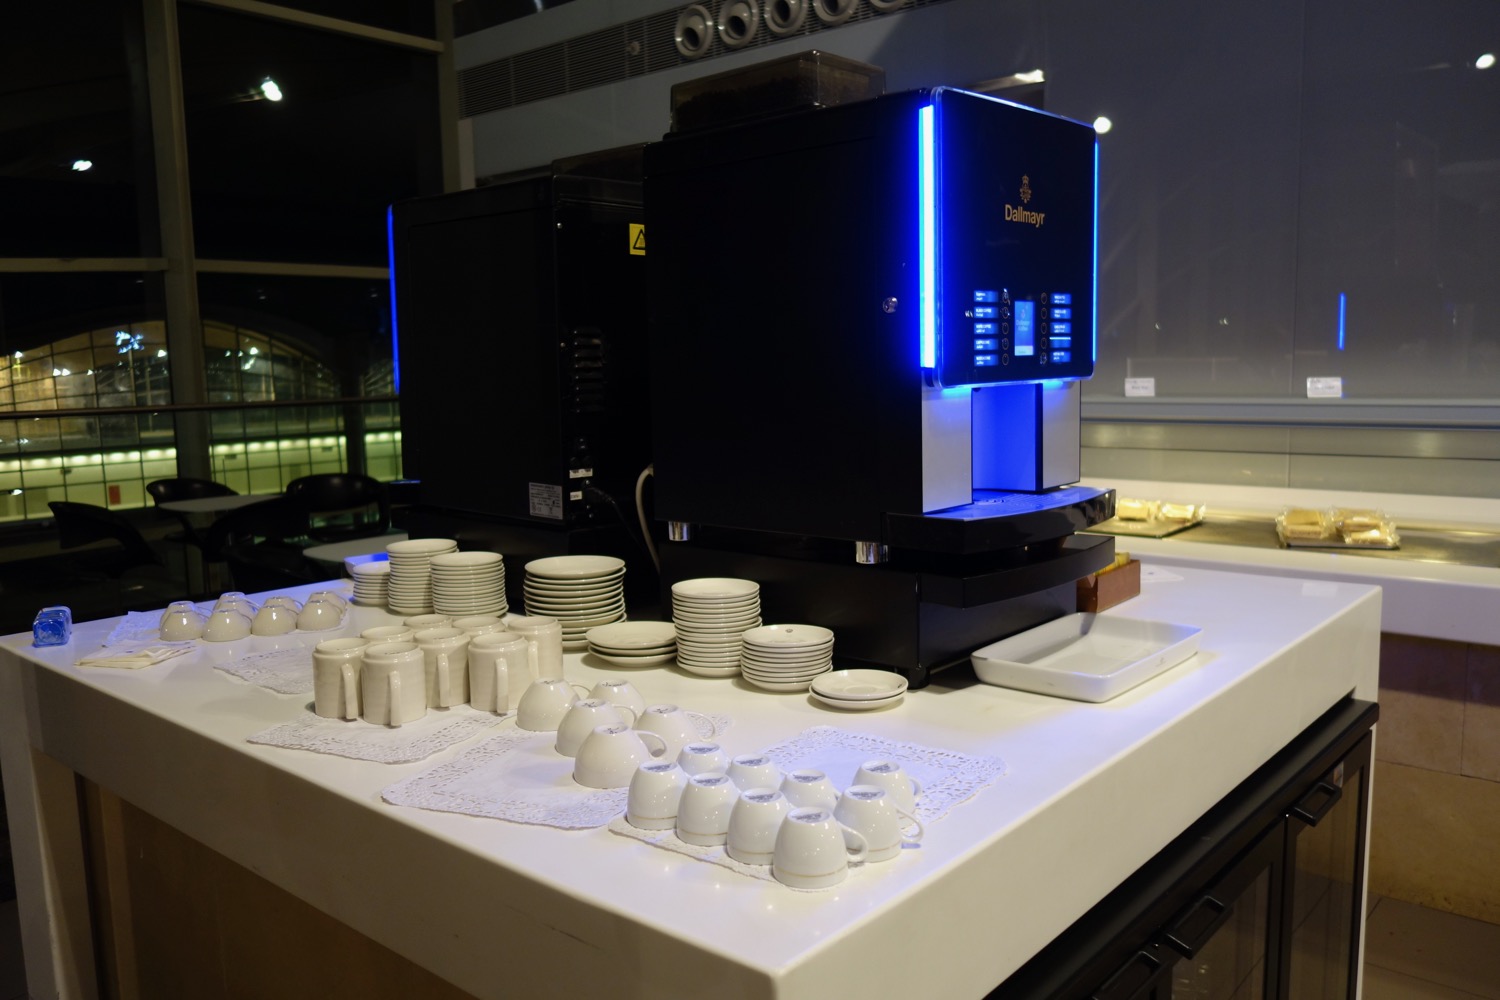 a machine with cups and plates on a table